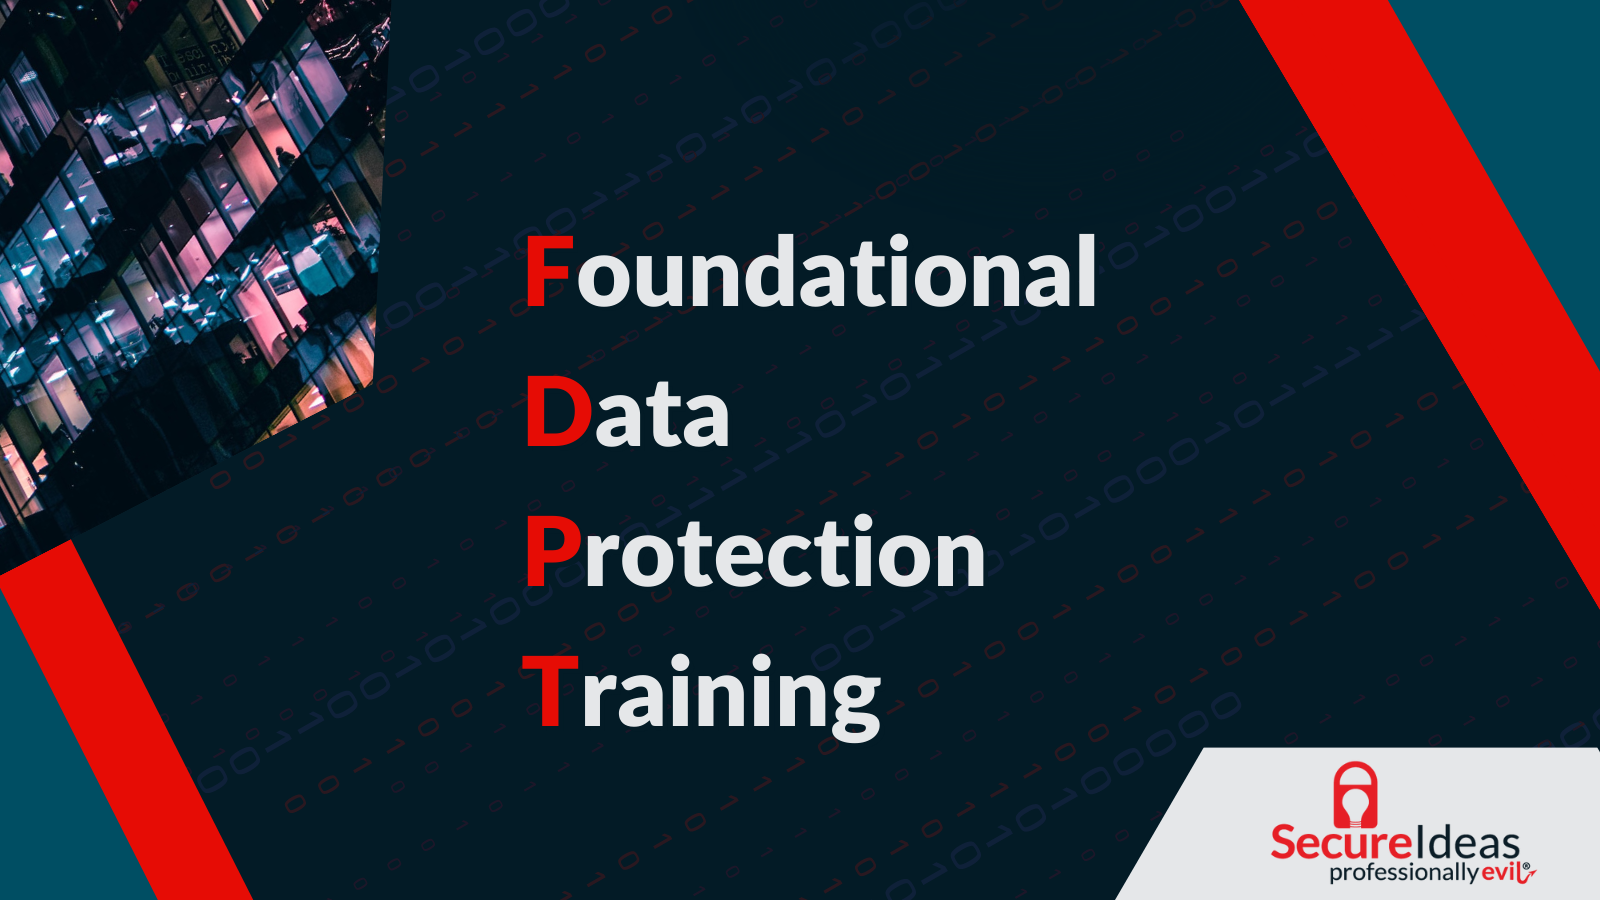 Secure Ideas - Foundational Data Protection Training (FDPT)